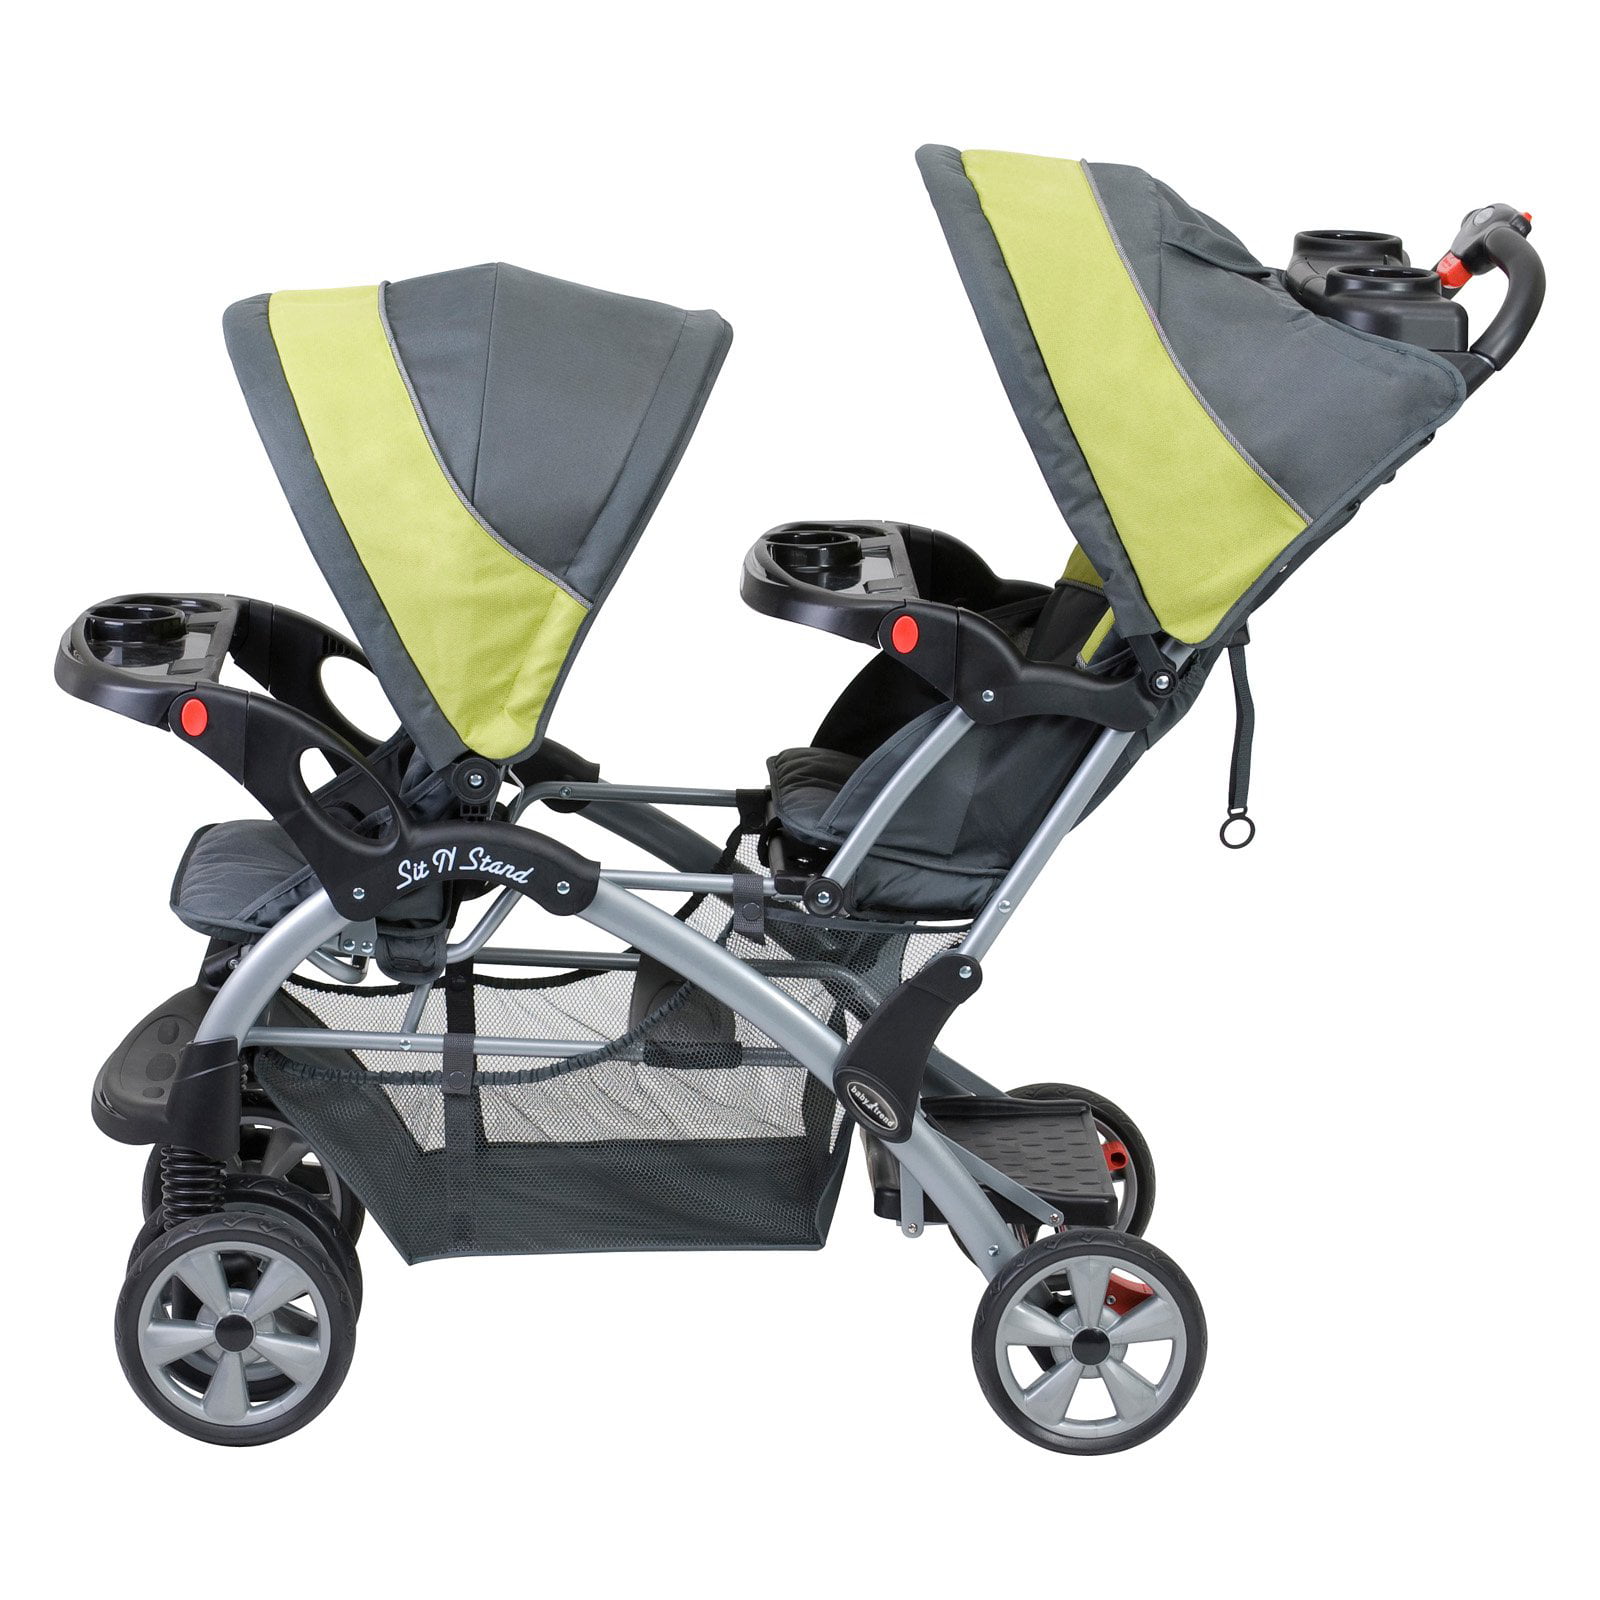 Baby Trend Sit n Stand Double Stroller - Carbon, Carbon 90014014506 | eBay